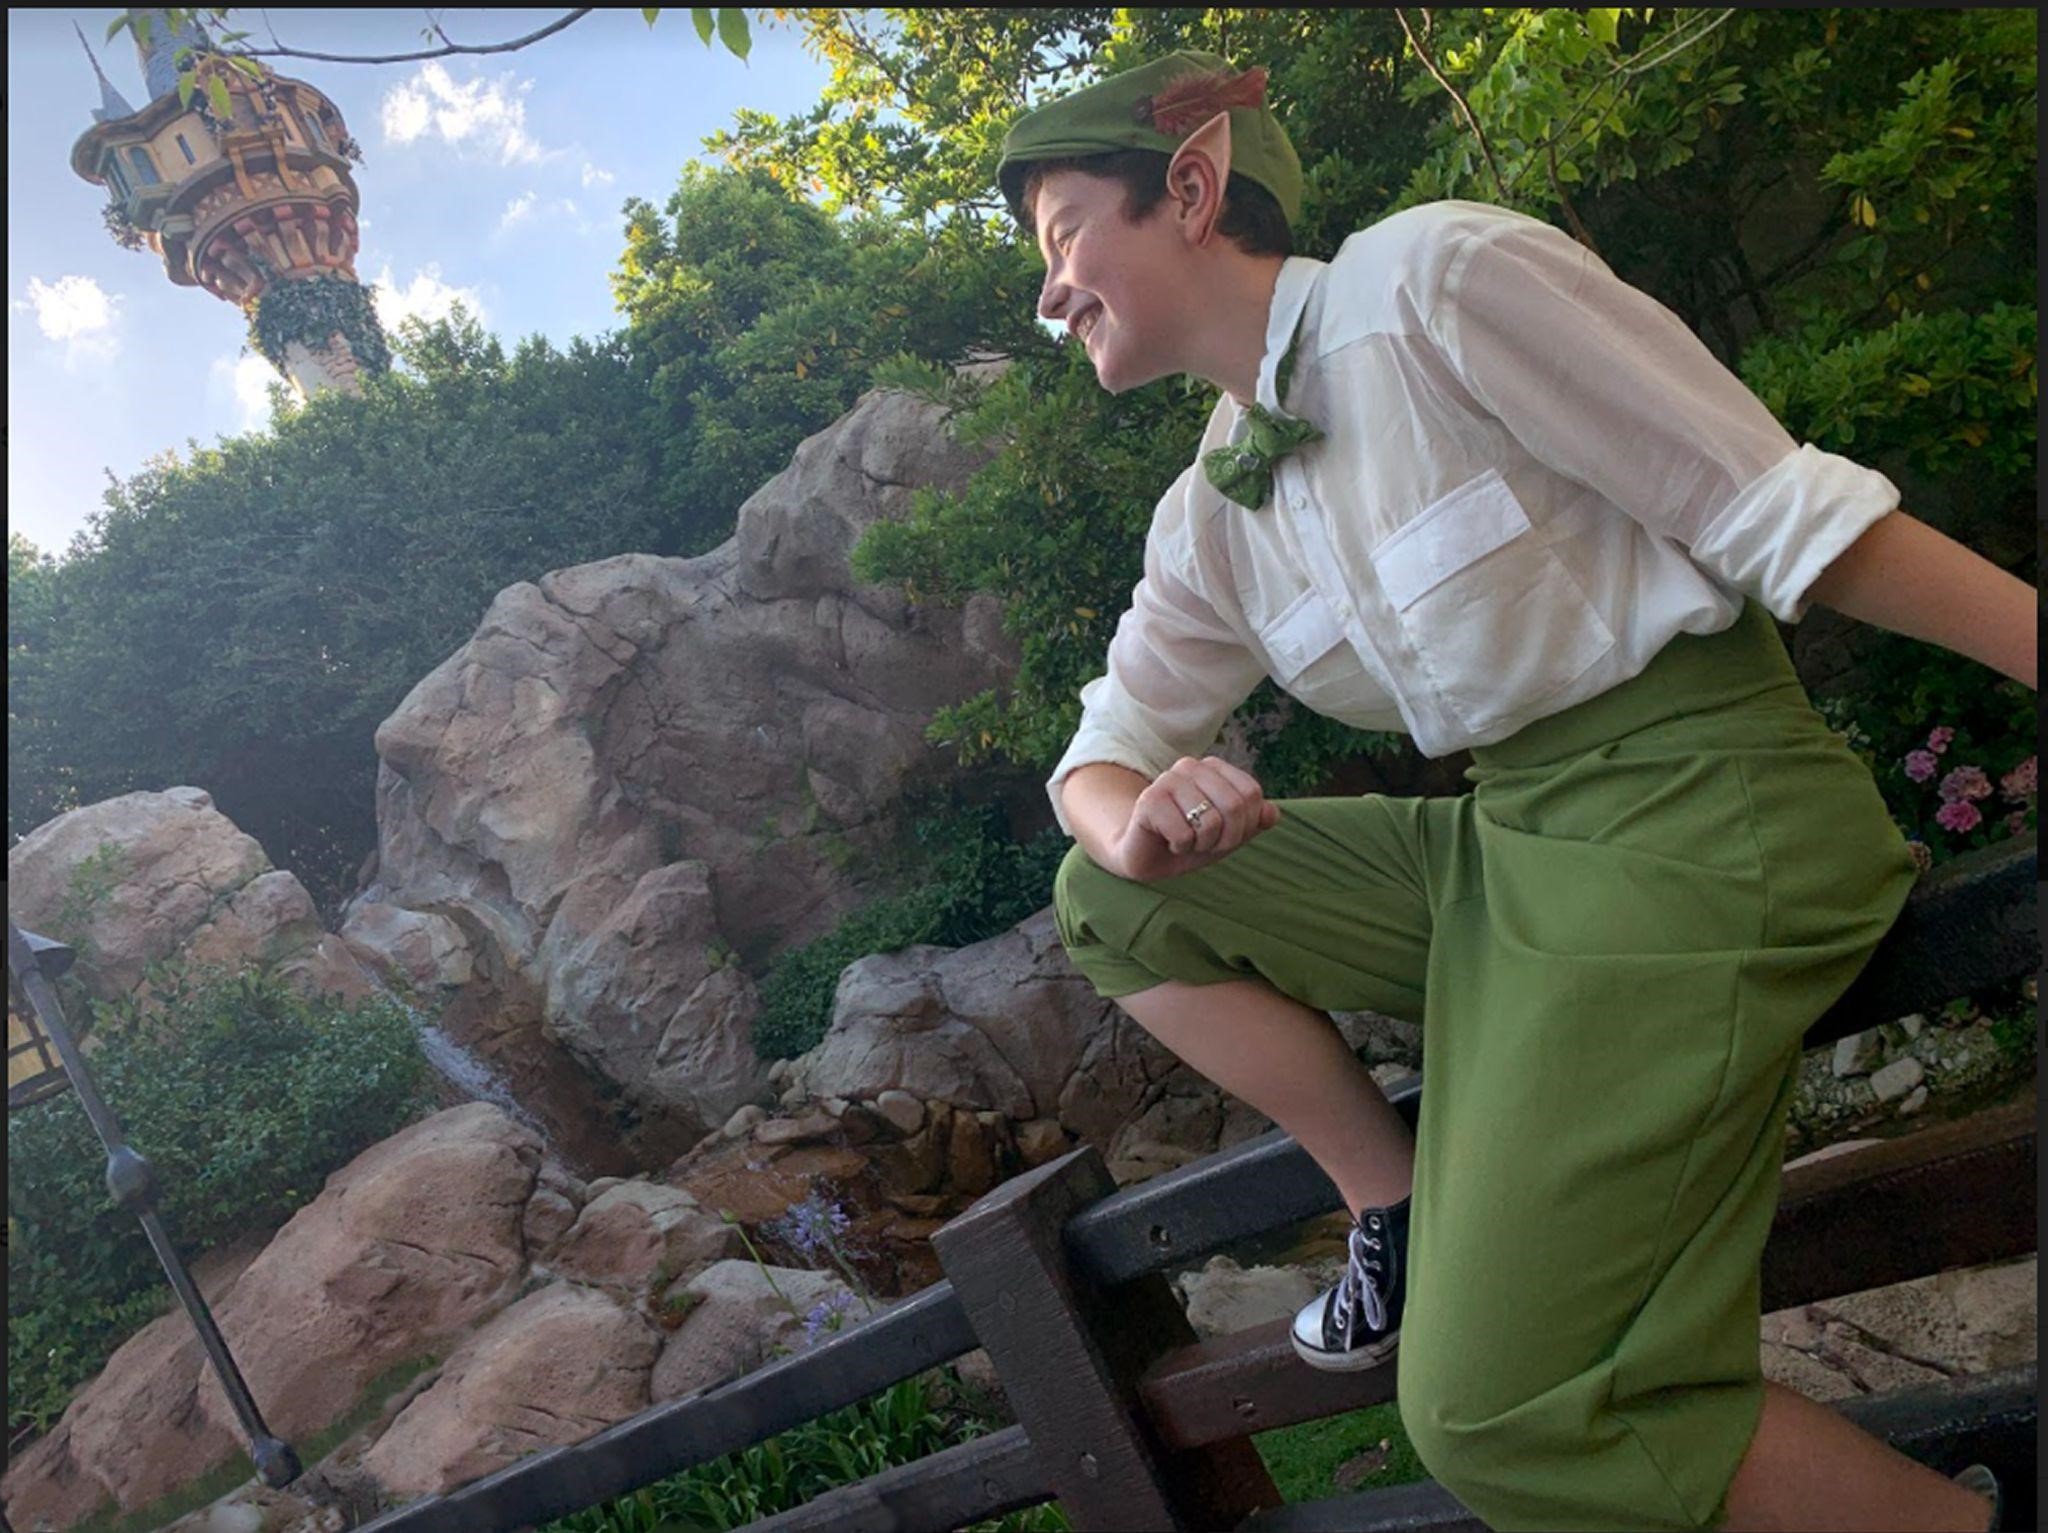 Ila White, sitting on a fence with a forest scene in the background, wearing green pants, a white shirt, a green bowtie, a green felt hat, and pointed ears.